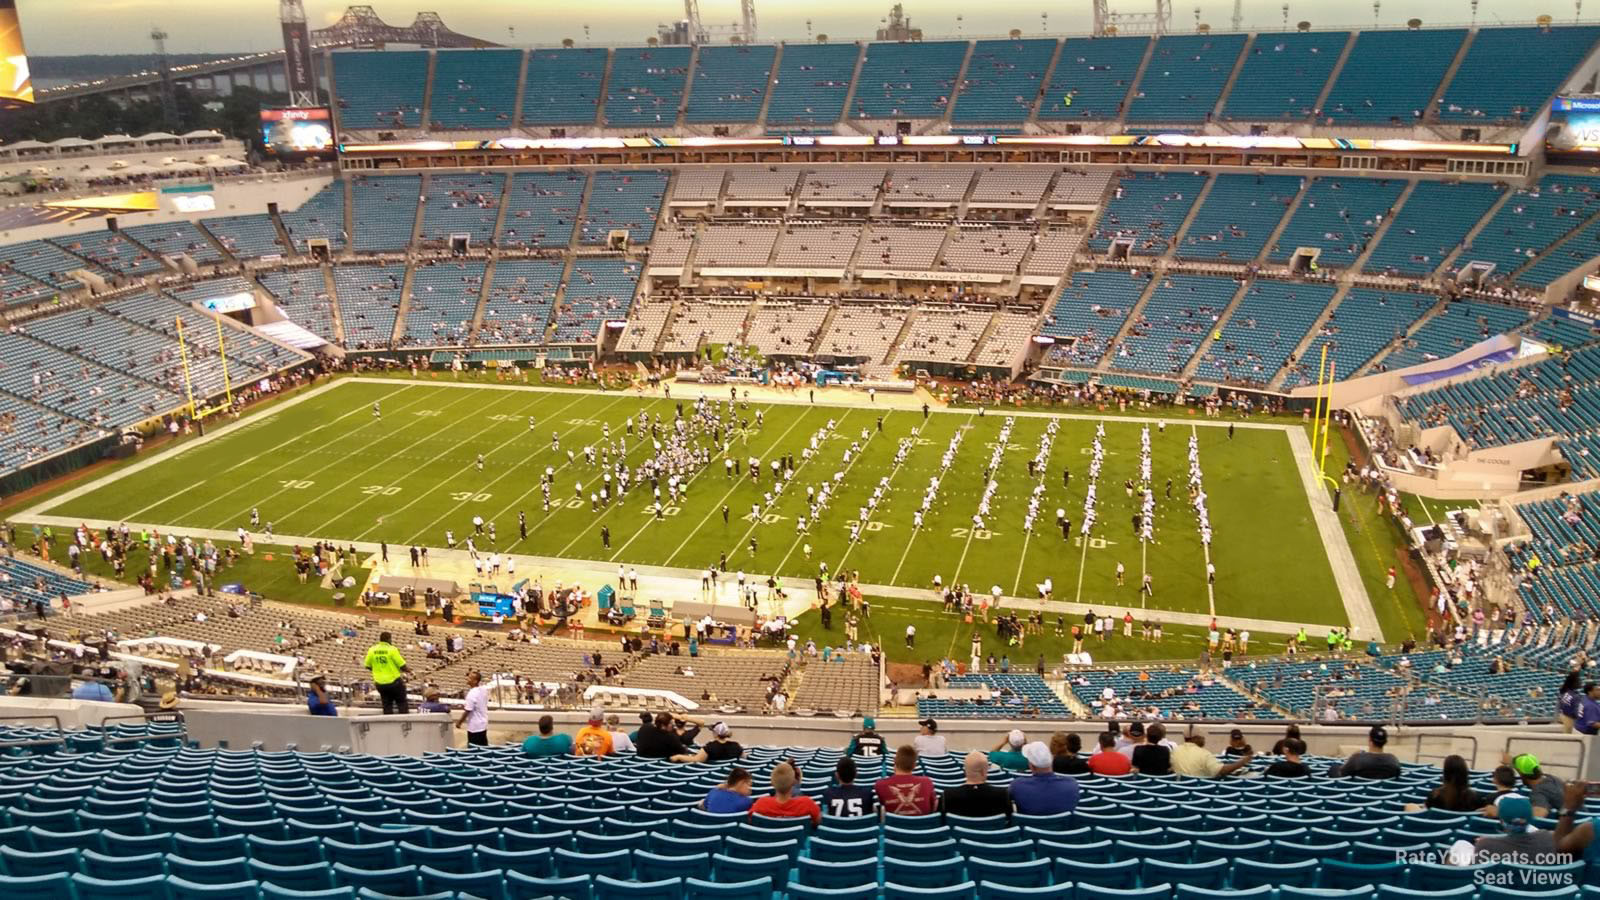 section 408, row bb seat view  - tiaa bank field